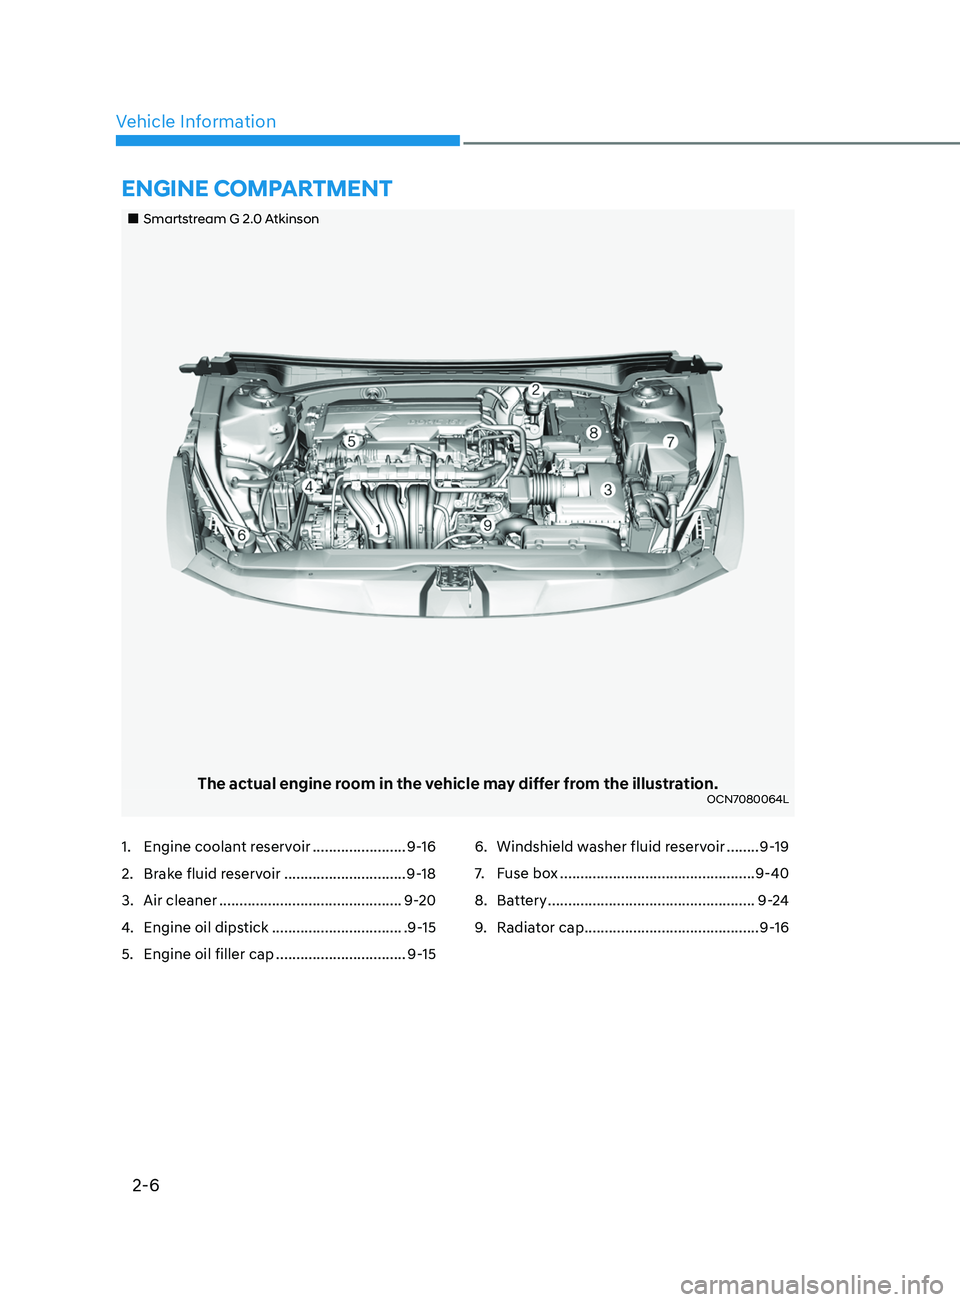 HYUNDAI ELANTRA 2021  Owners Manual 2-6
Vehicle Information
„„Smartstream G 2.0 Atkinson
The actual engine room in the vehicle may differ from the illustration.OCN7080064L
EnginE ComPartmEnt
1. Engine coolant reservoir .......